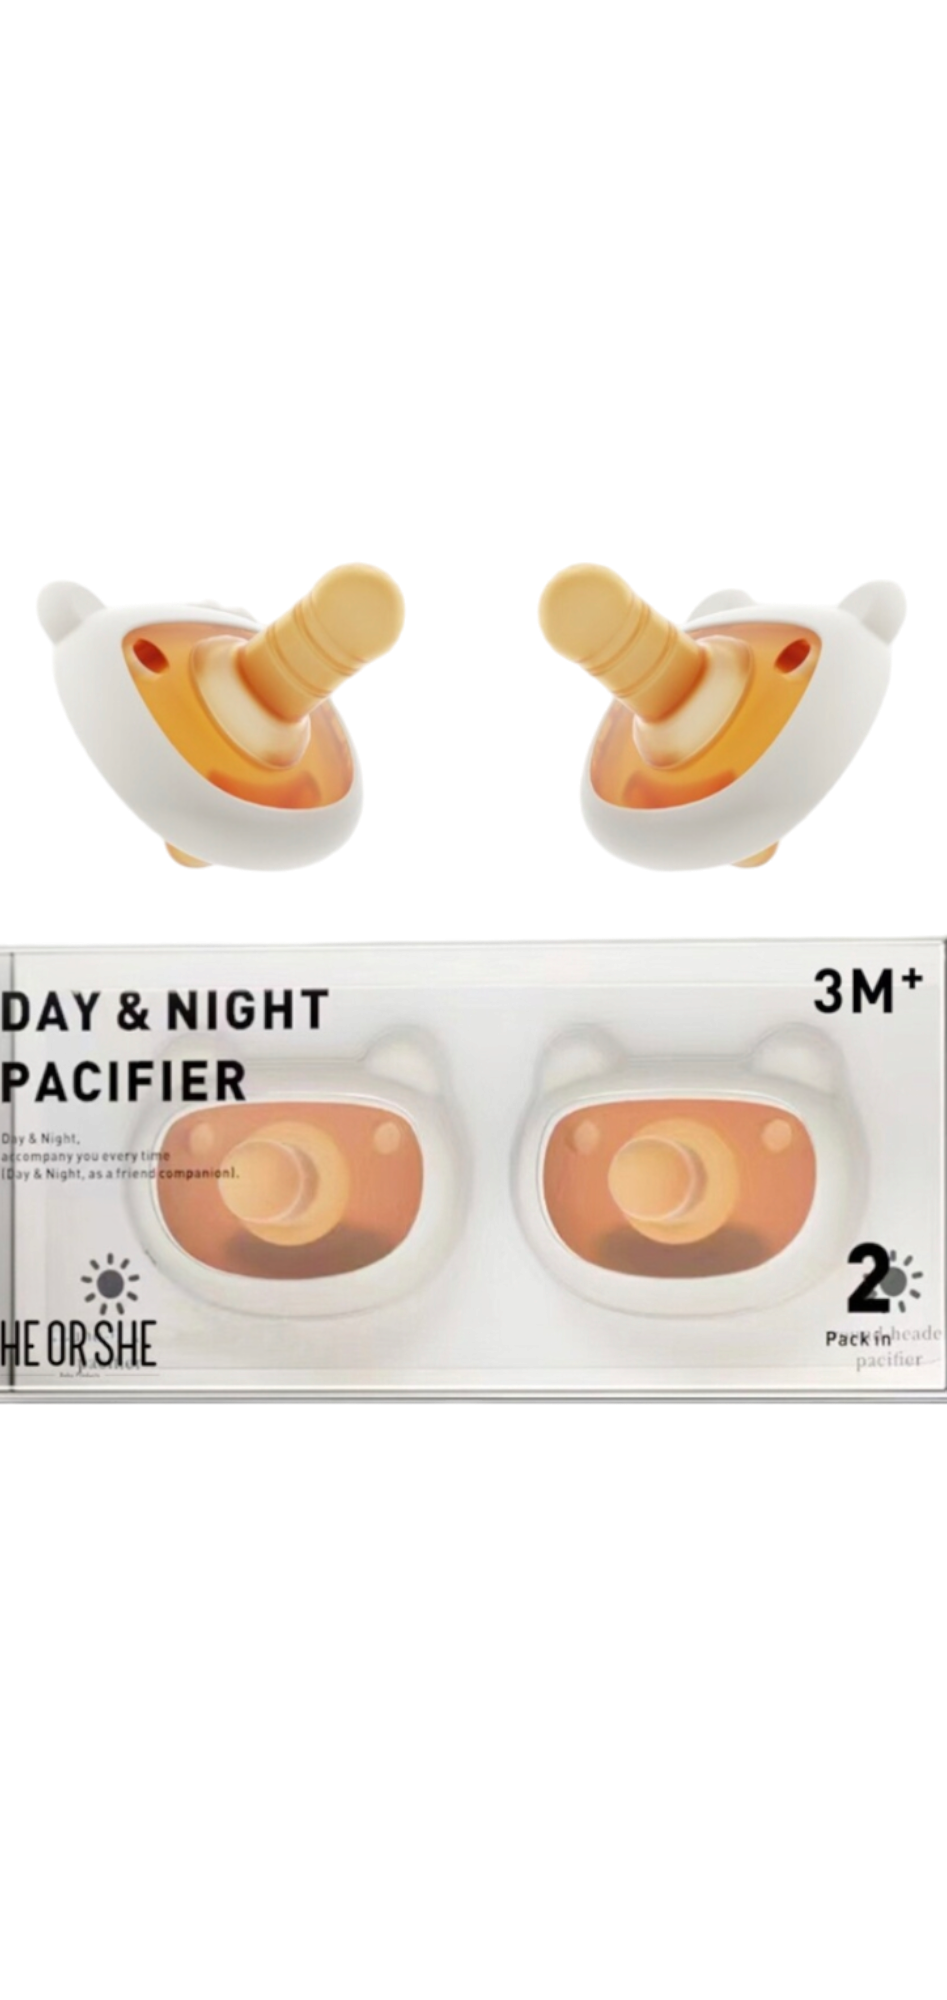 HE OR SHE DAY & NIGHT PACIFIER (WHITE)